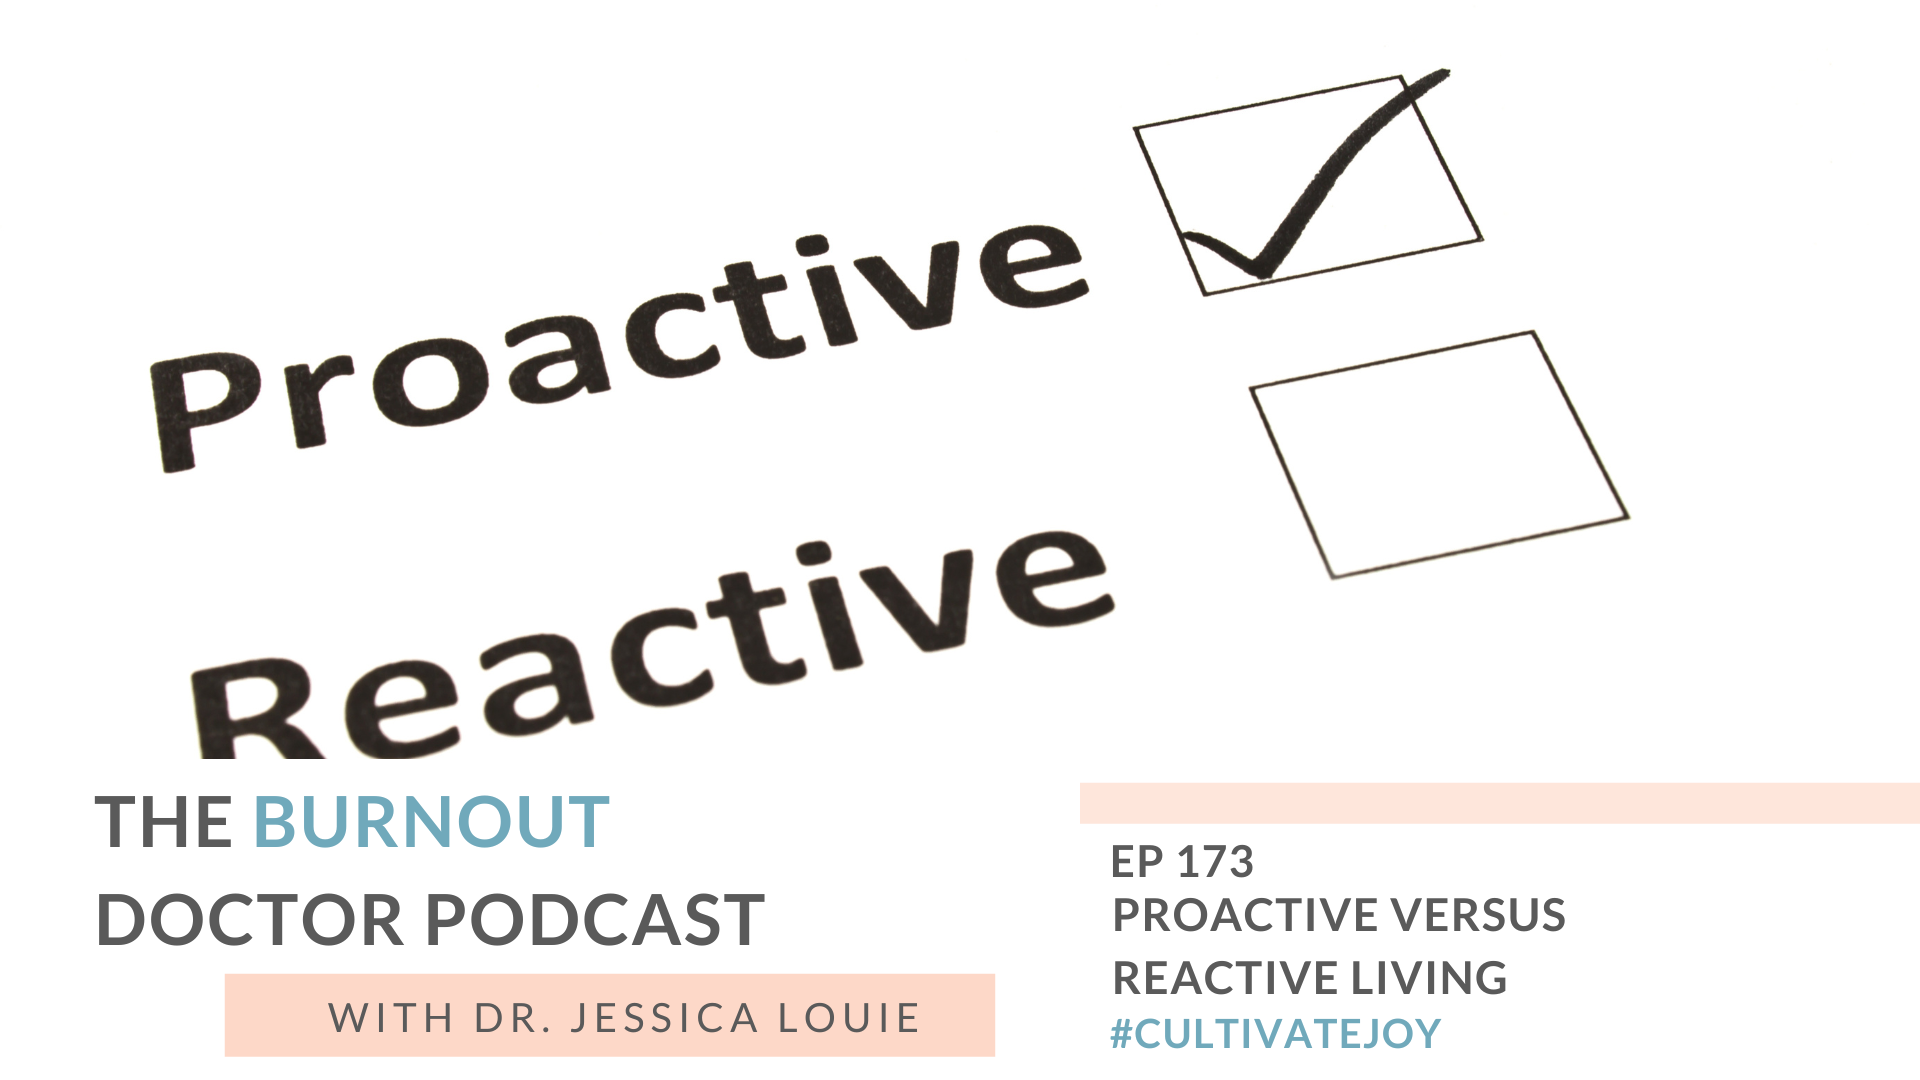 Proactive versus reactive living. How to go from reacting to life to proactively living life. Pharmacist burnout. The Burnout Doctor Podcast. Dr. Jessica Louie